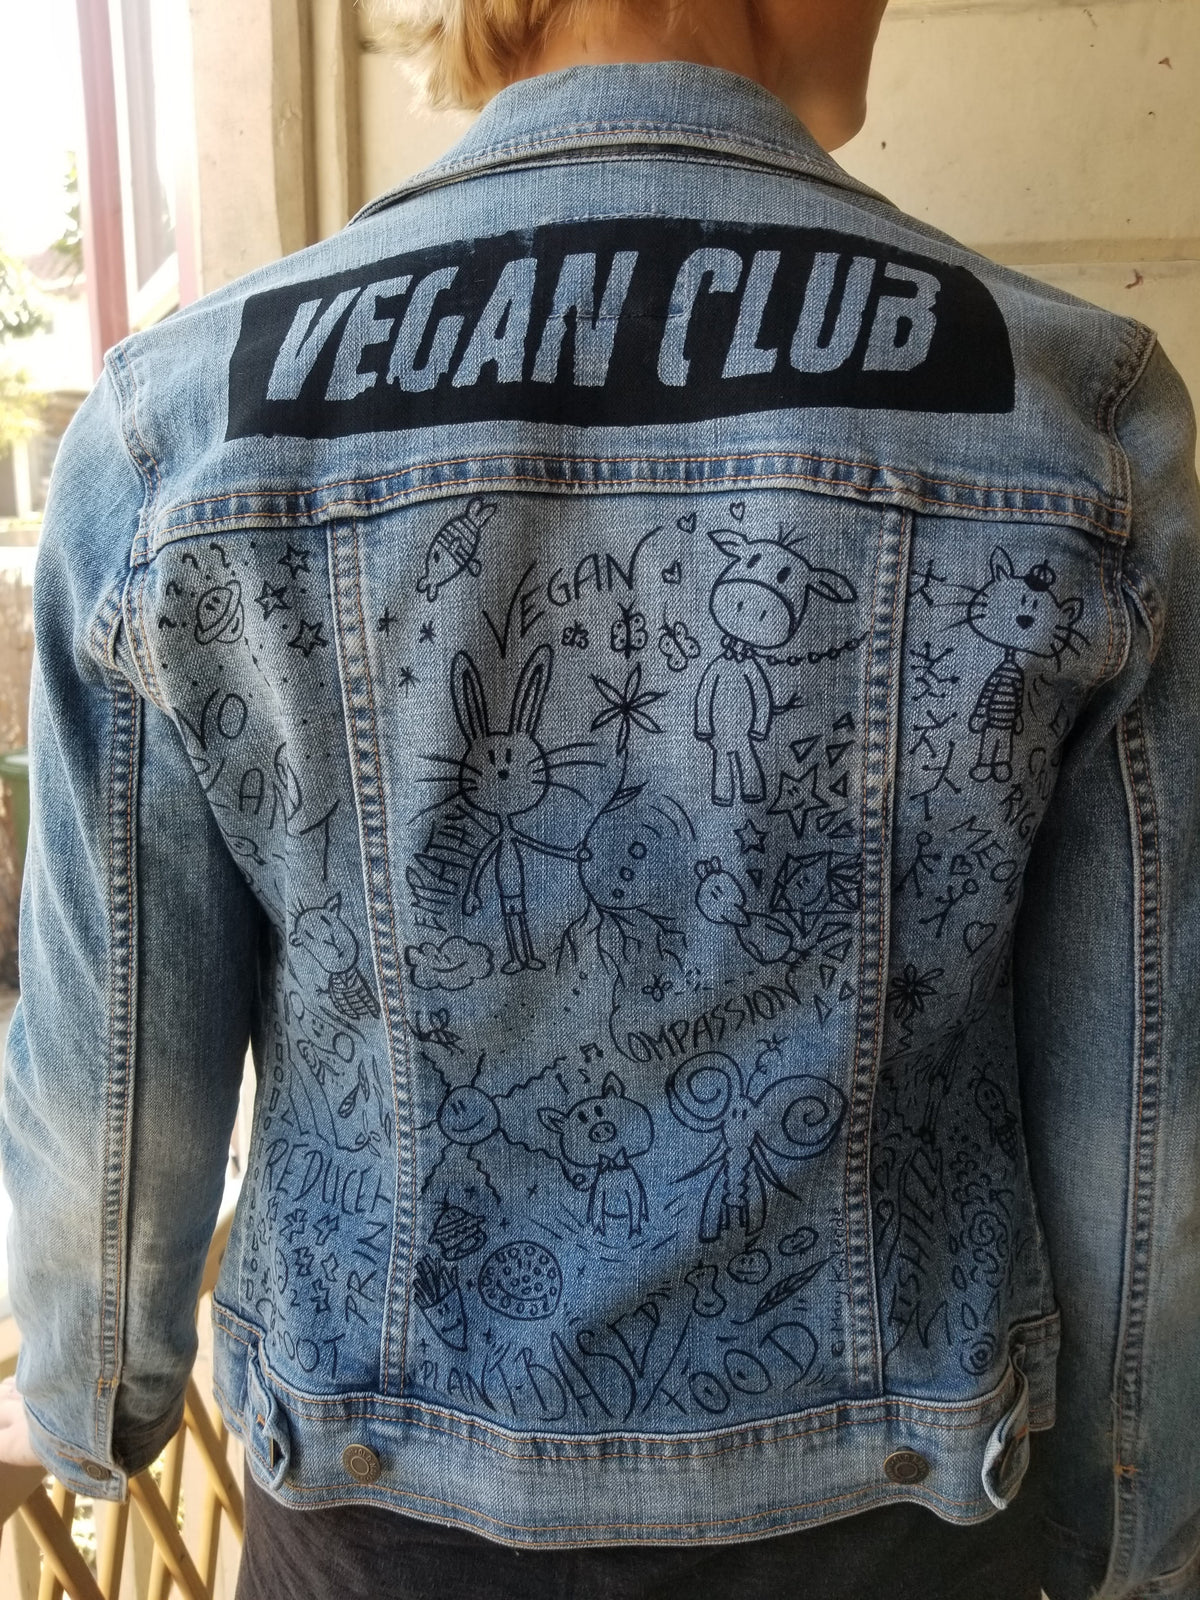 SOLD - Upcycled Jean Jacket Vegan Club featuring cute animal doodles by Mary Kolende